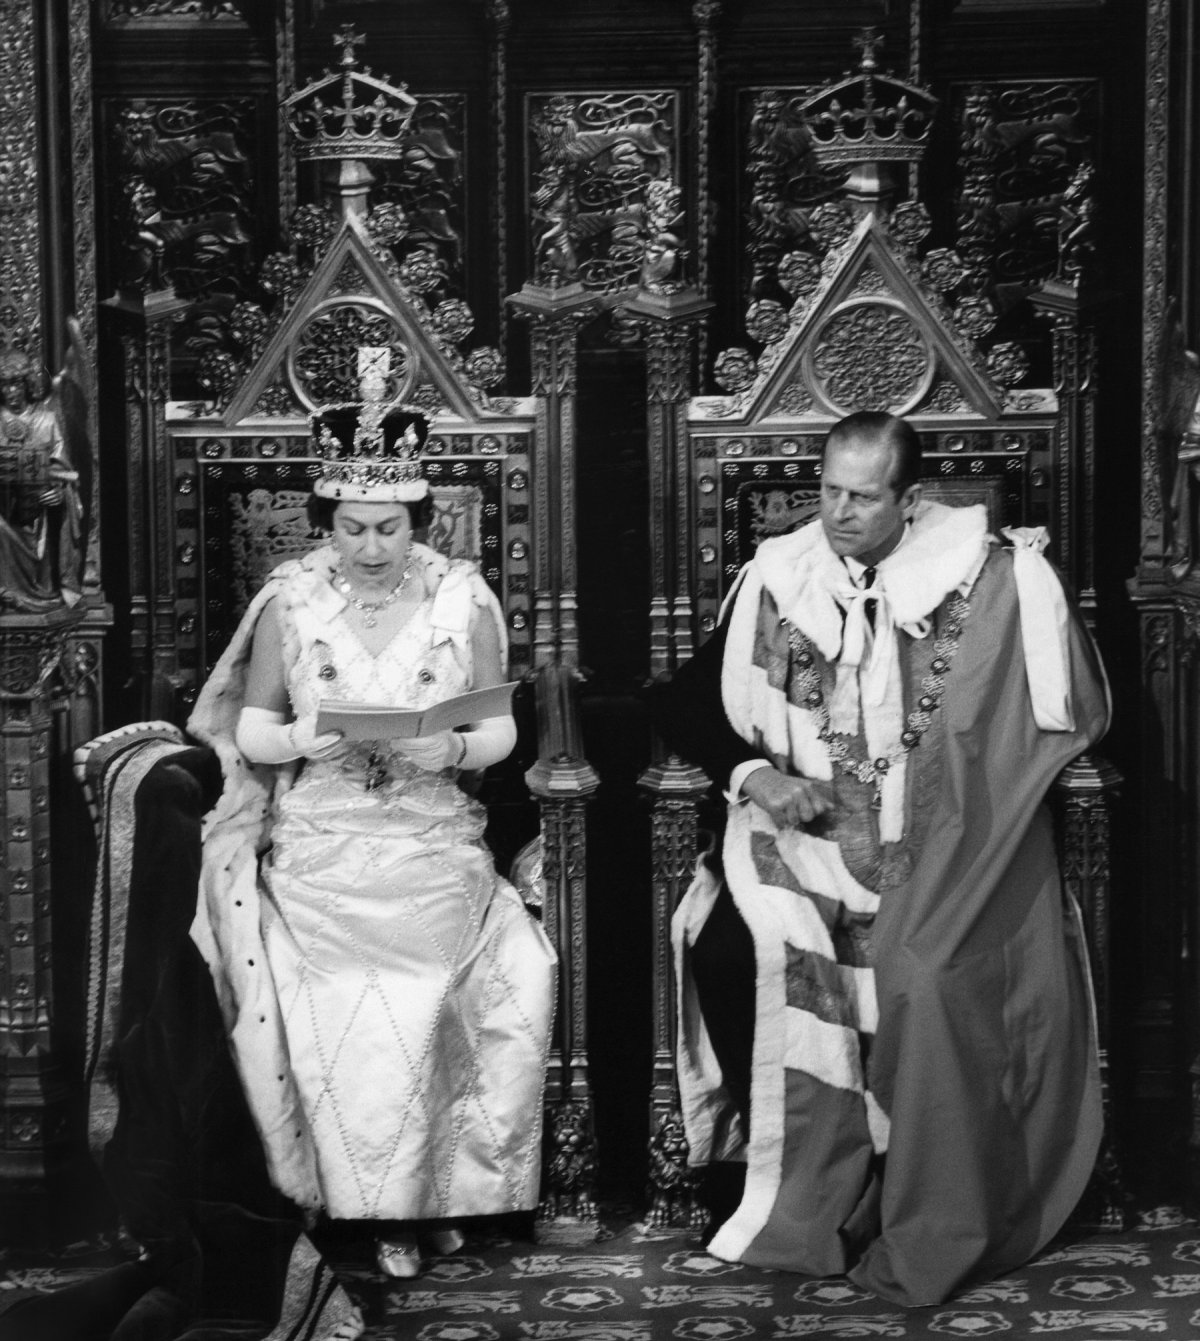 1970-queen-elizabeth-ii-read-her-speech-in-the-house-of-lords-alongside-her-husband-for-the-state-opening-of-parliament-in-1970